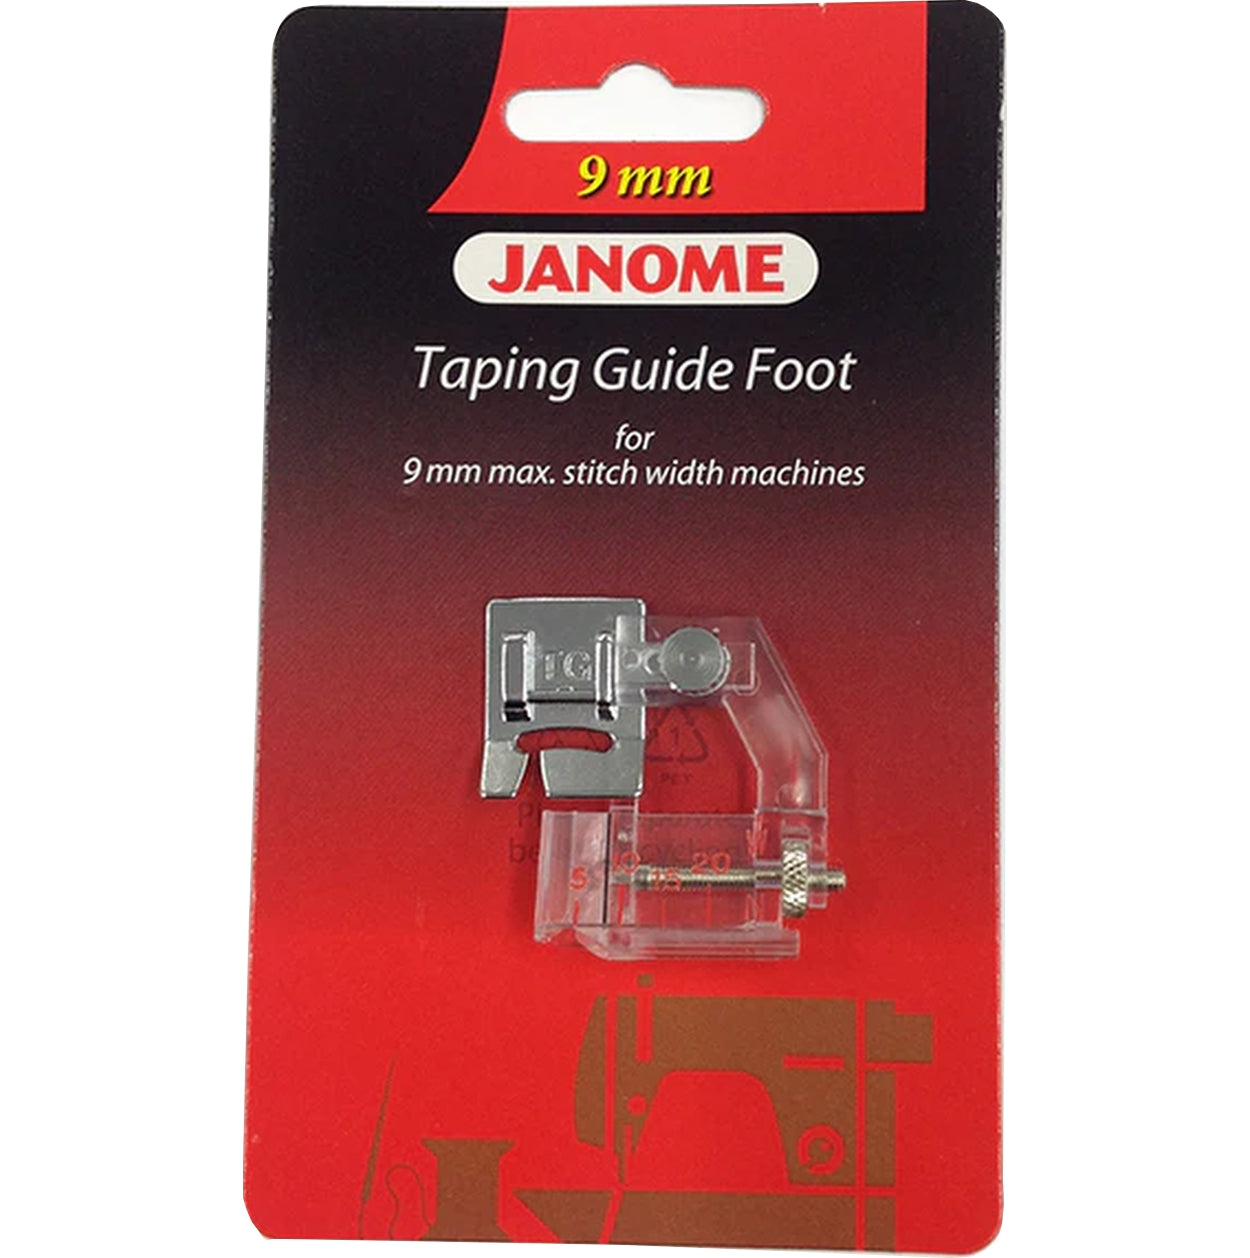 Janome Taping Guide Foot / adjustable bias binder from Jaycotts Sewing Supplies